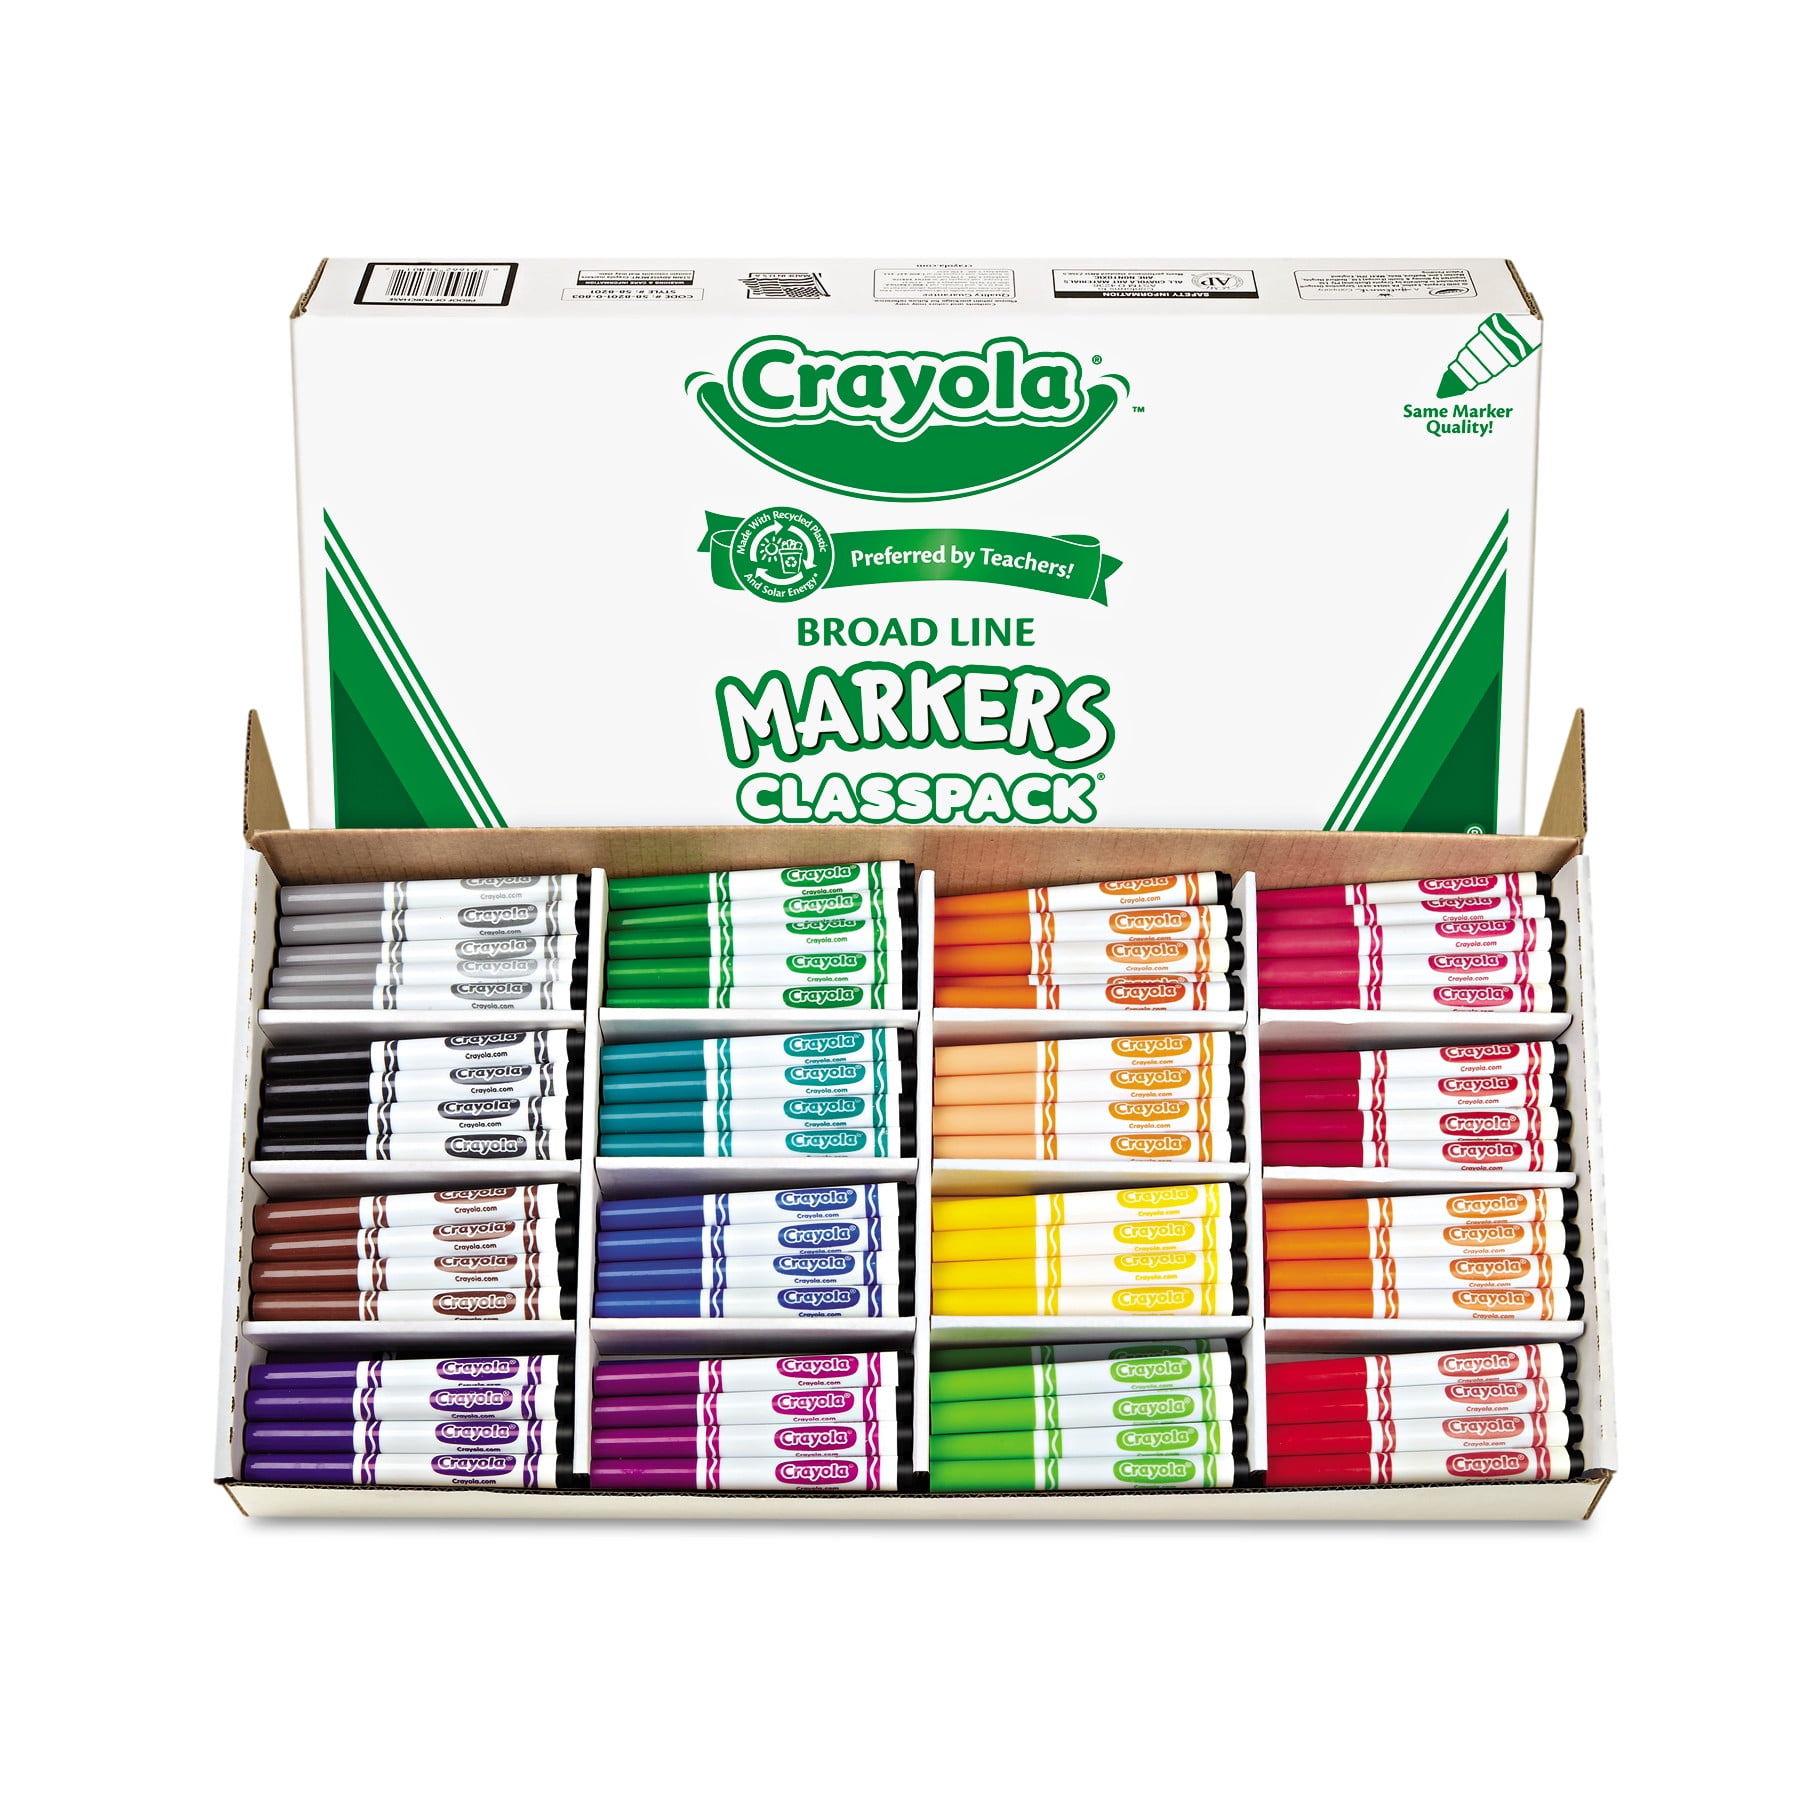 Crayola Broad Line Markers - Black (12ct), Markers for Kids, Bulk School  Supplies for Teachers, Nontoxic, Marker Refill with Reusable Box